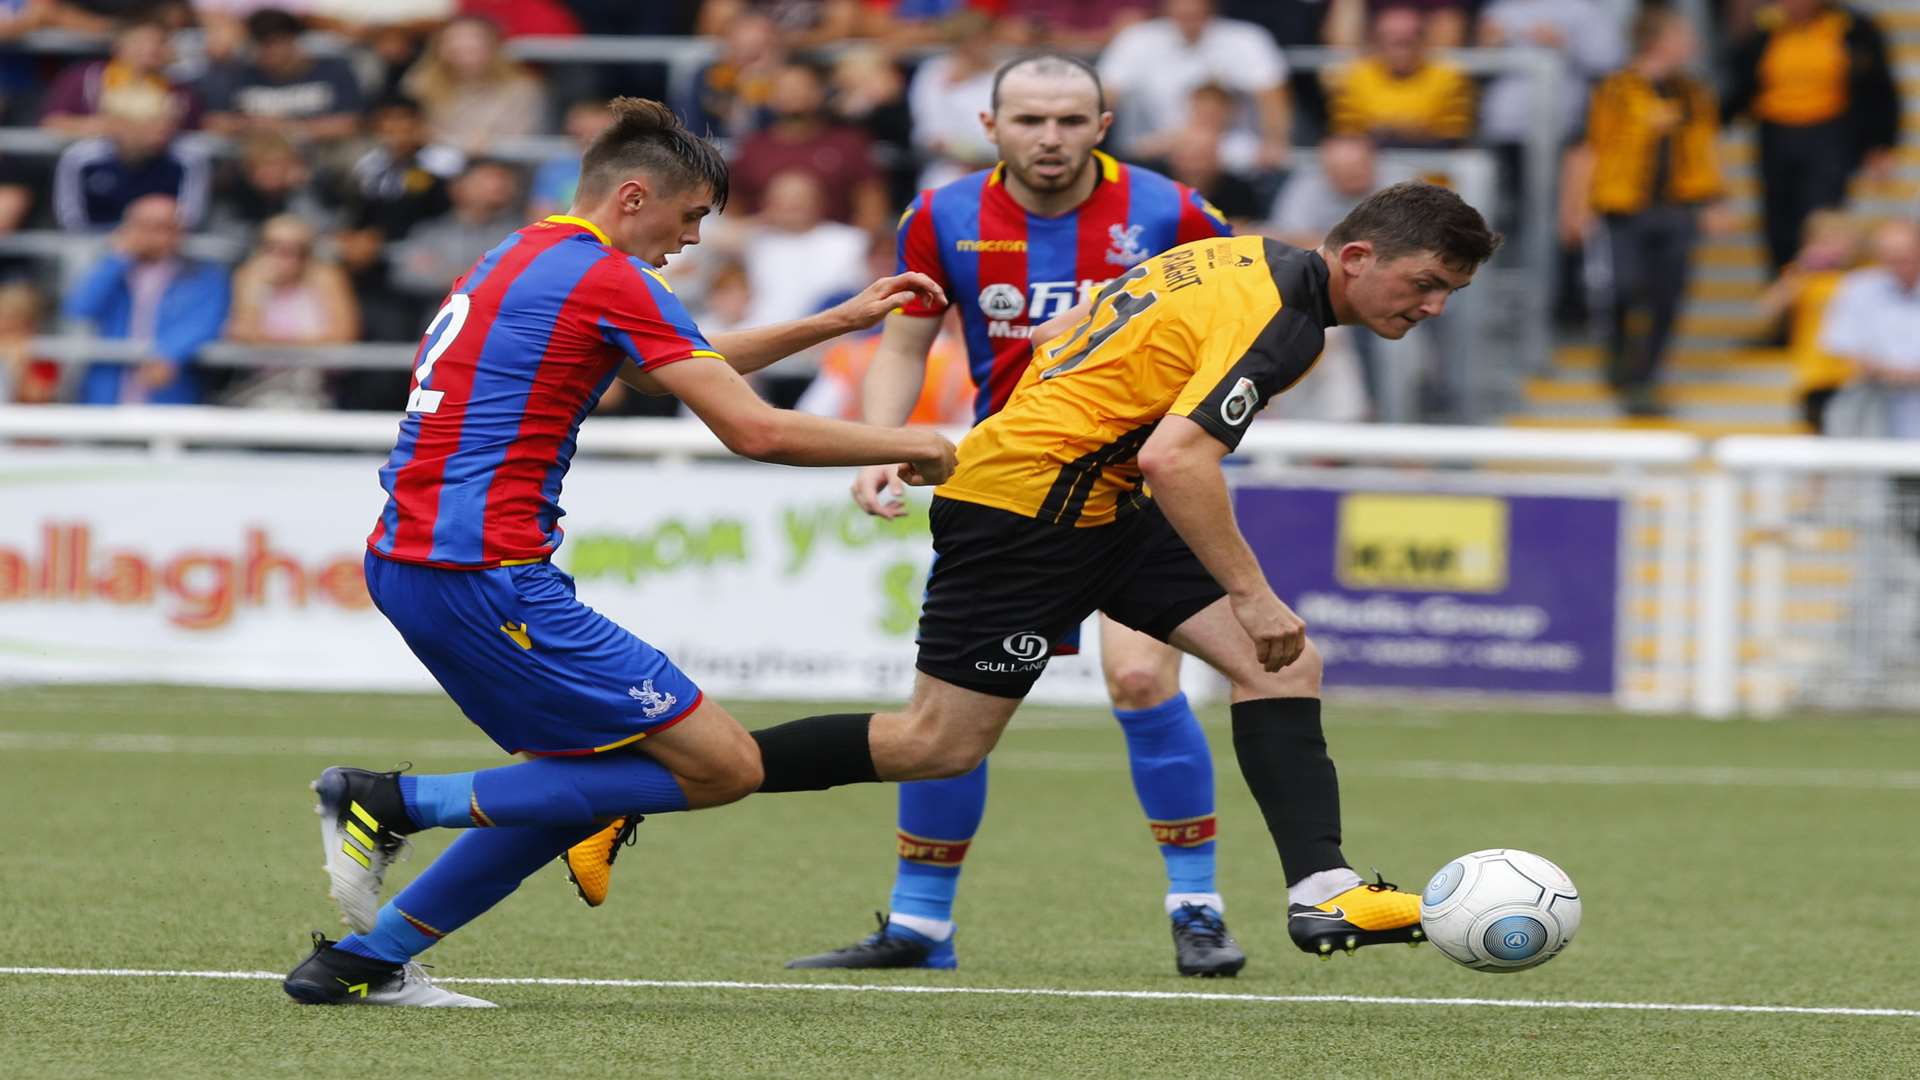 Action from Maidstone v Crystal Palace with Tom Wraight on the ball Picture: Andy Jones